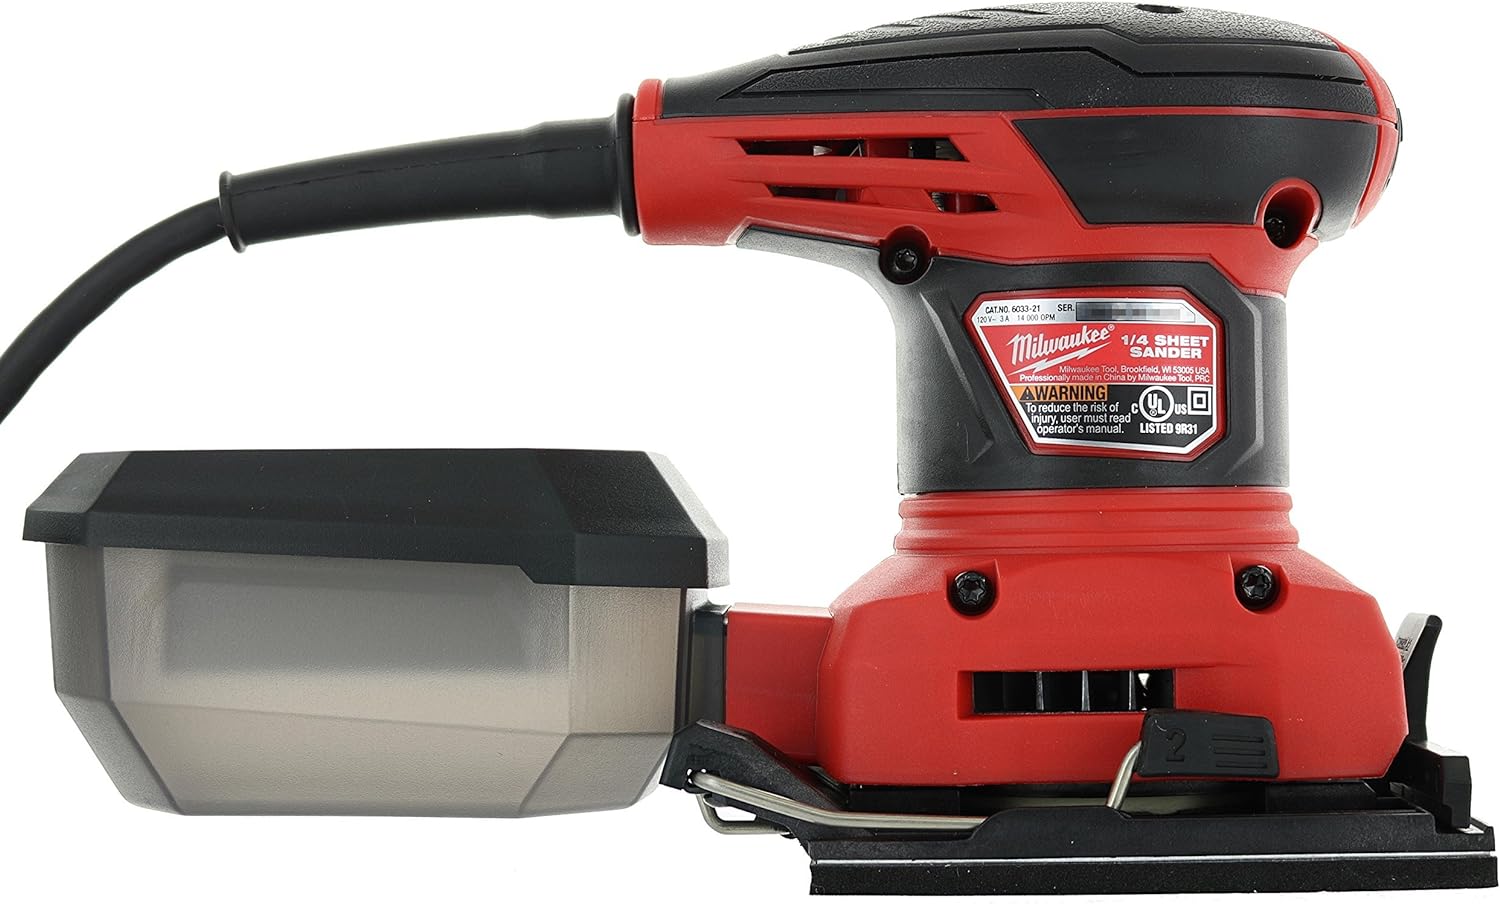 Milwaukee 6033-21 3 Amp 1/4 Sheet Orbital 14,000 OBM Compact Palm Sander with Dust Canister (2 Sheets of Sandpaper Included)